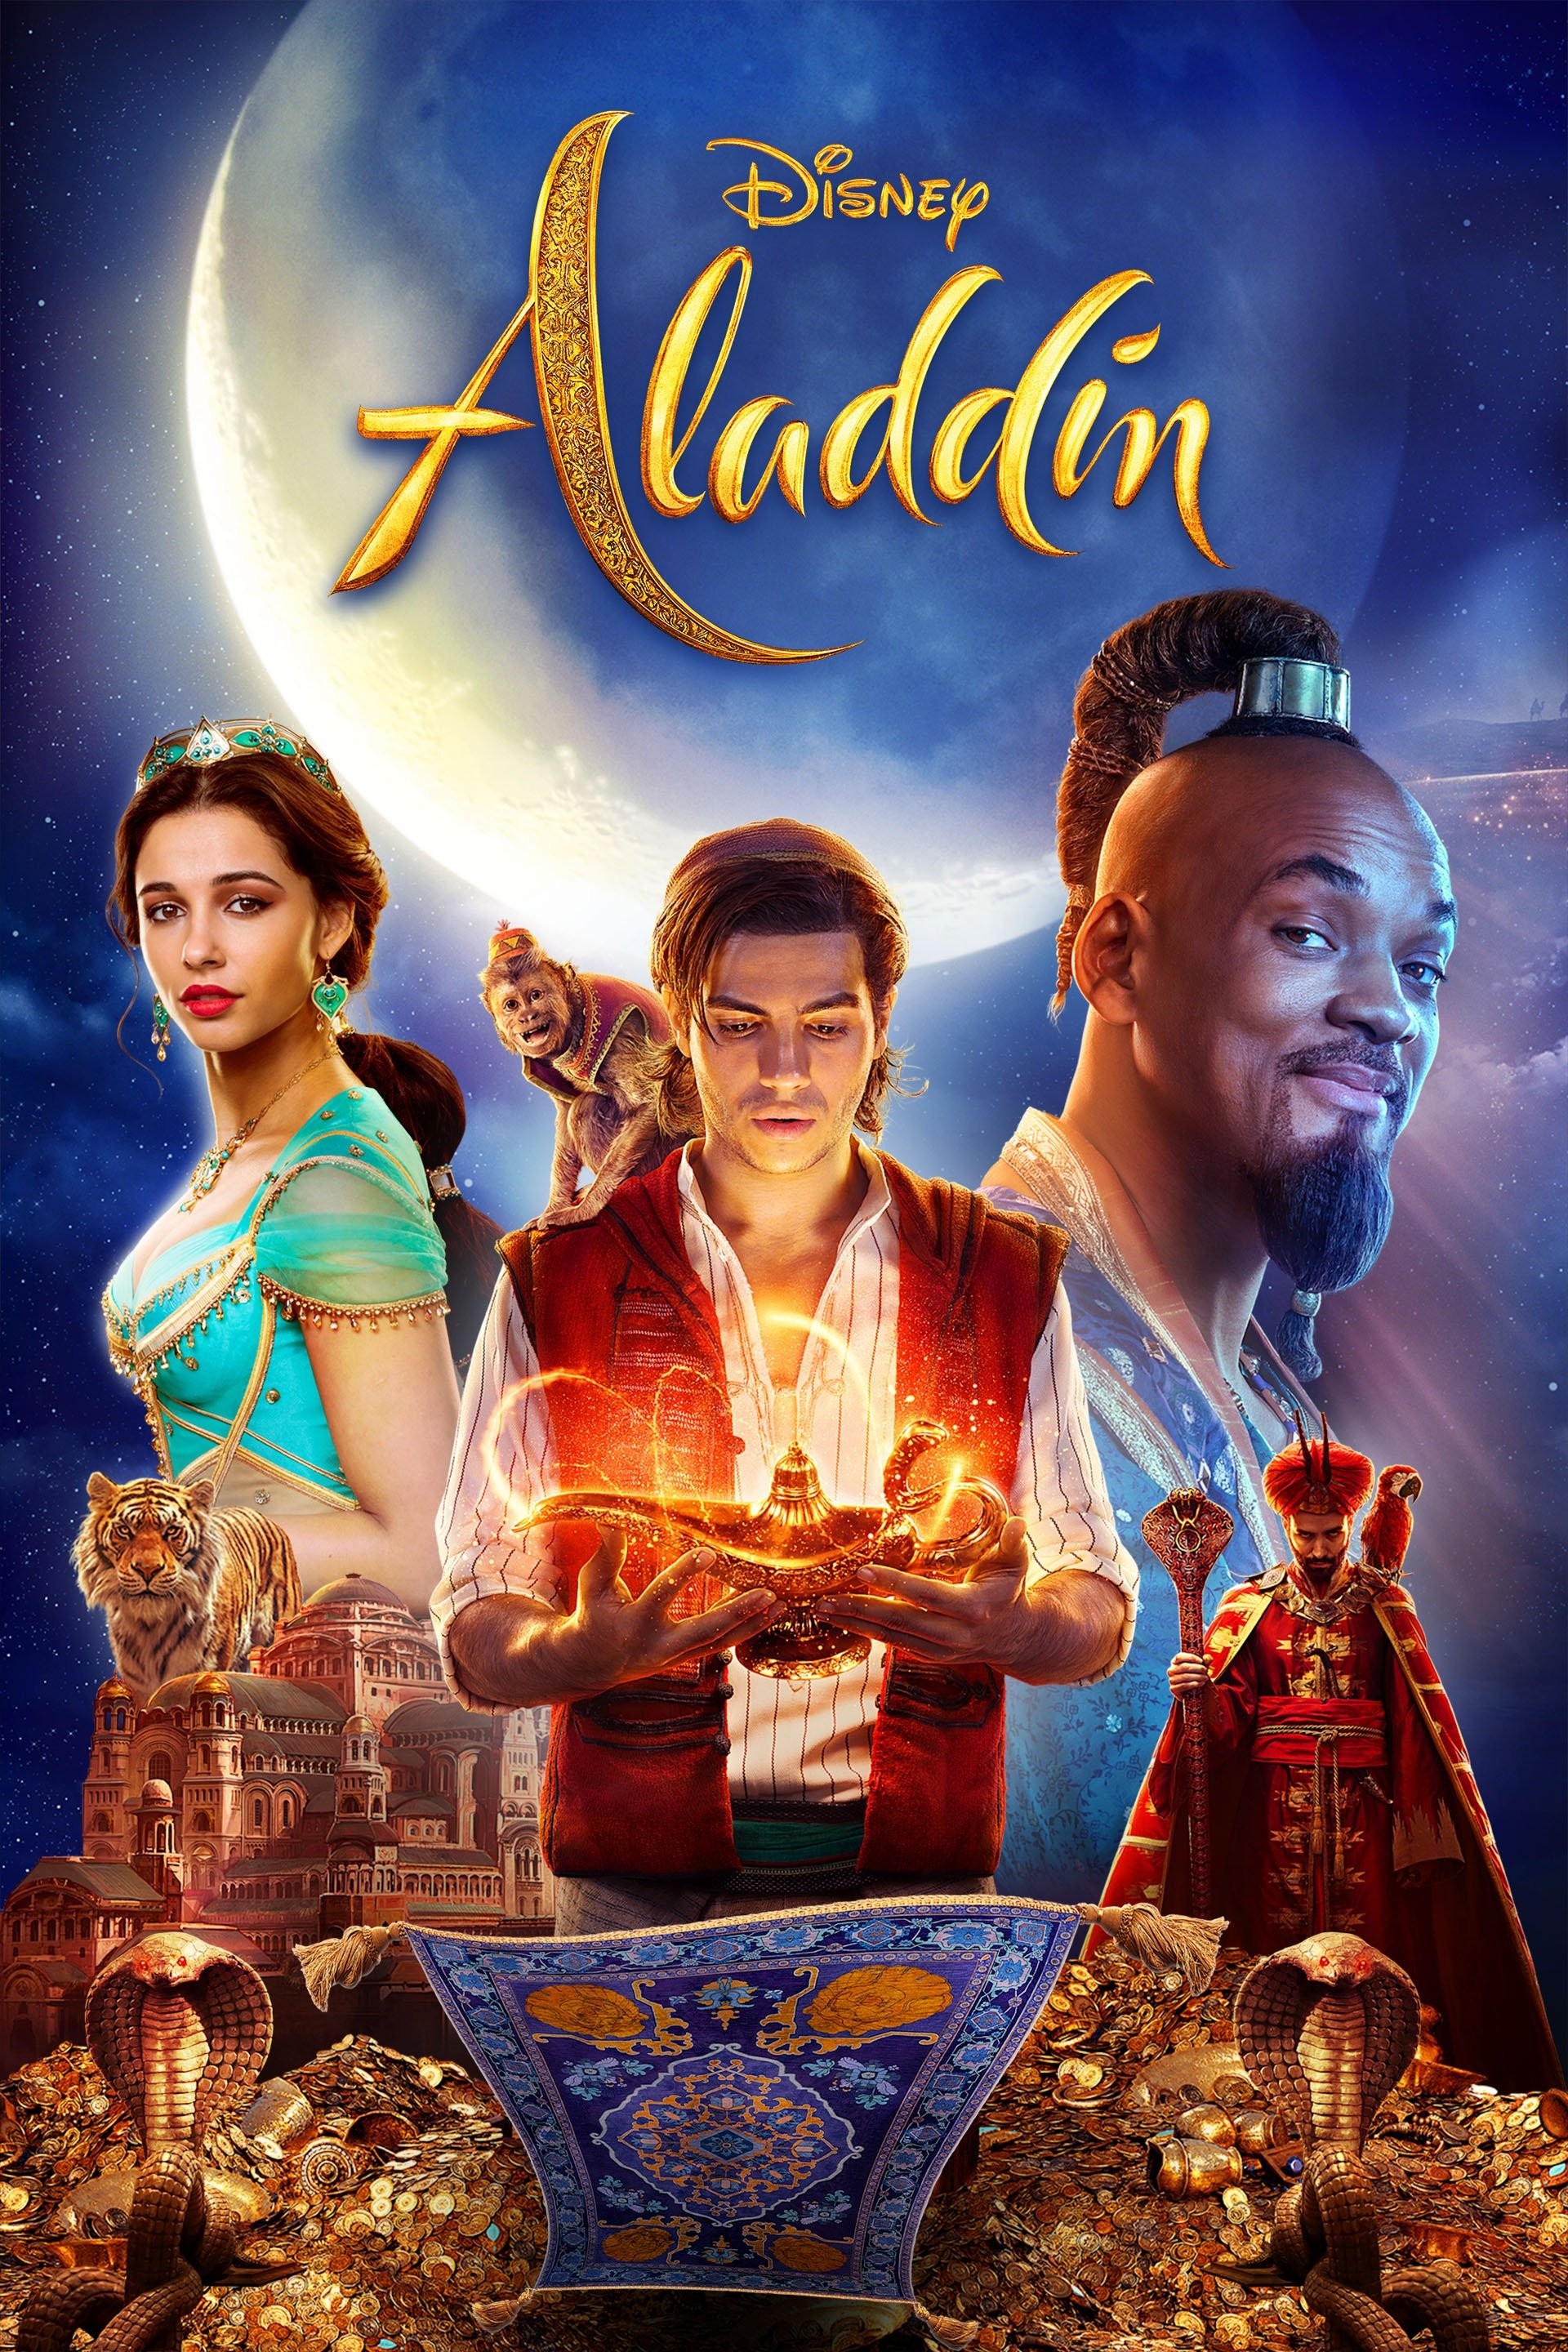 Aladdin is a 2019 American musical fantasy film directed by Guy Ritchie